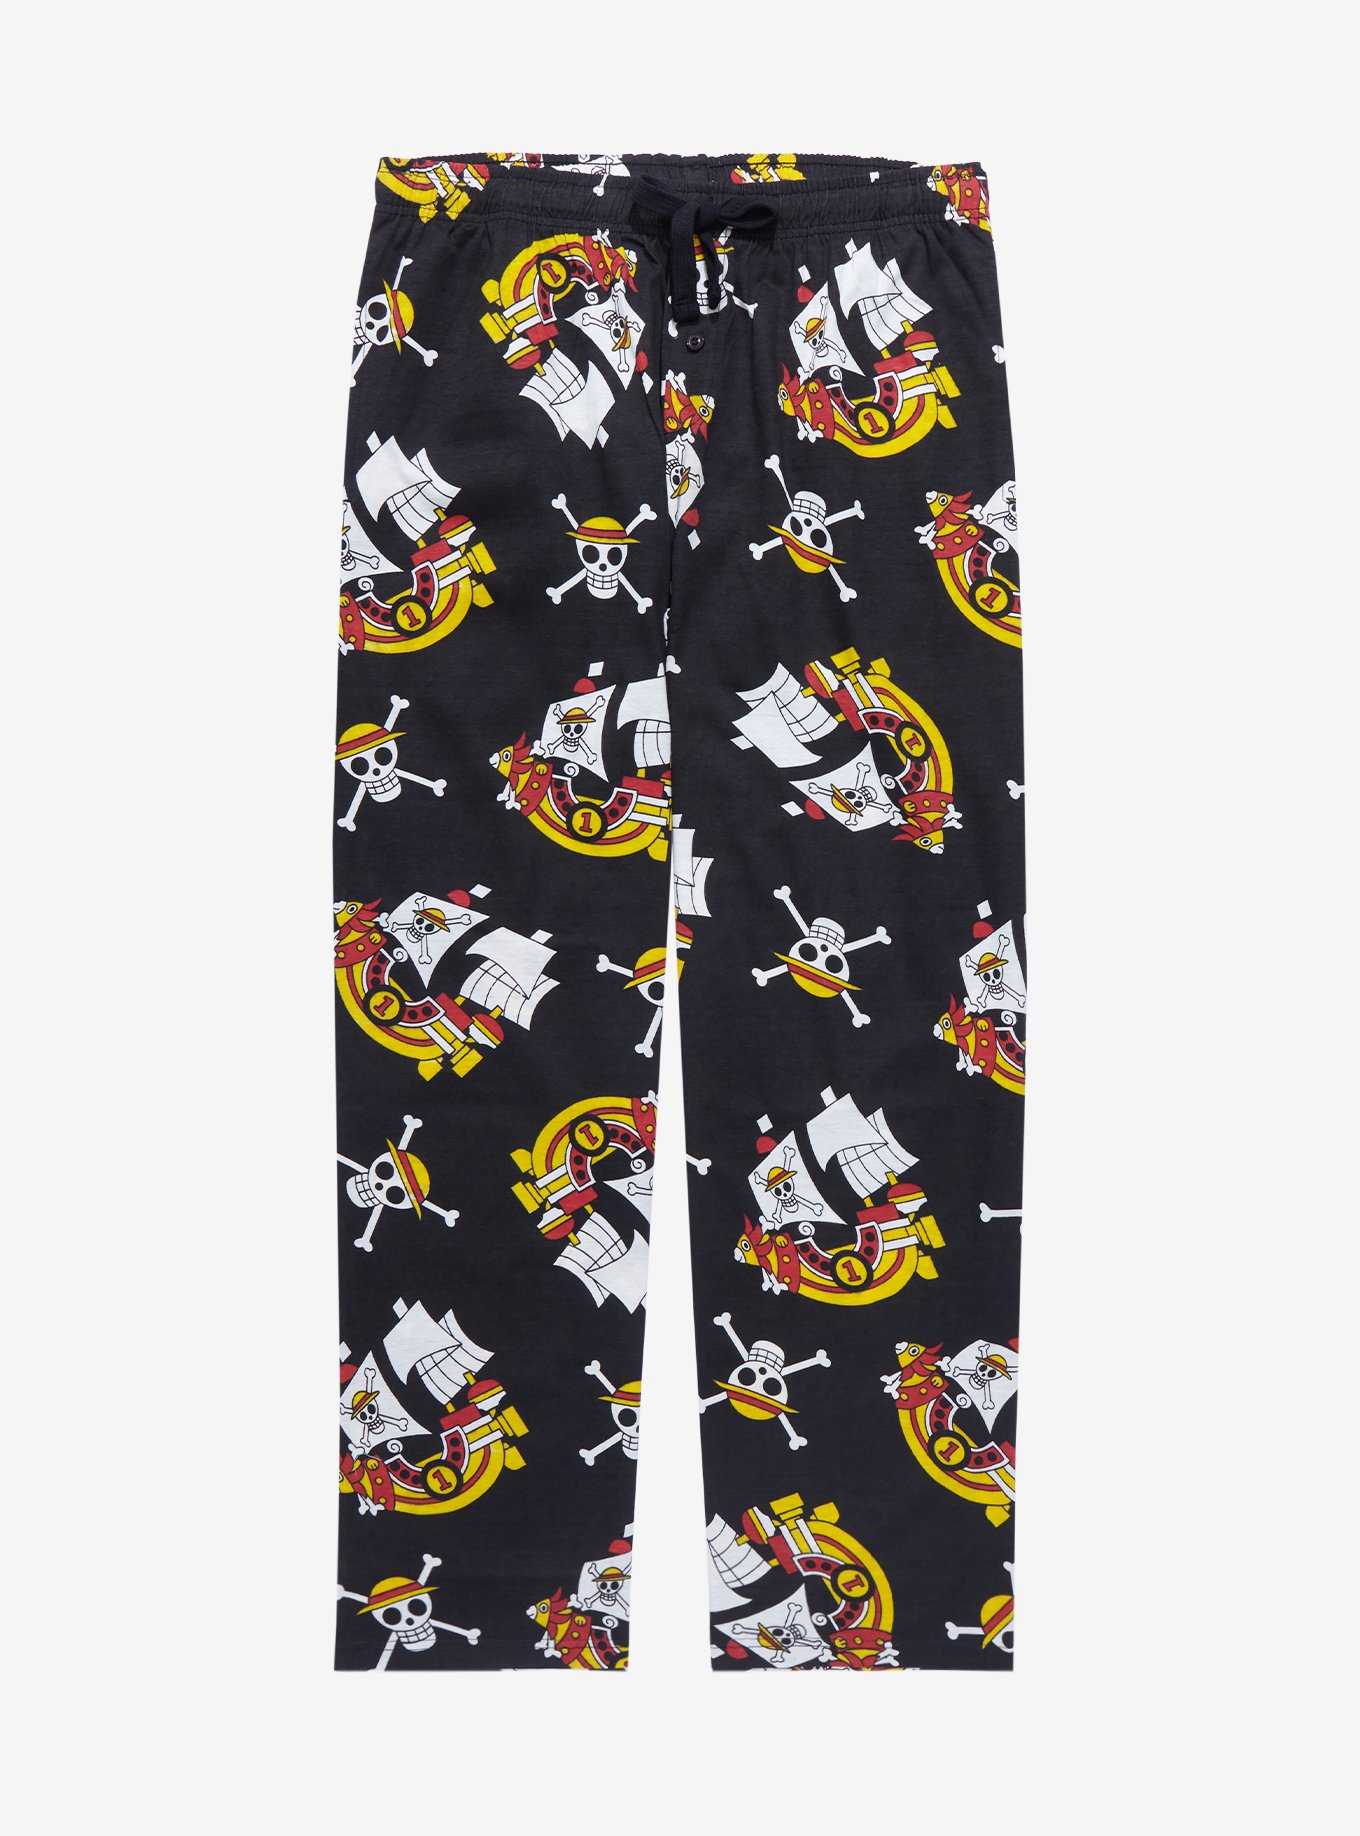 One Piece Thousand Sunny Allover Print Sleep Pants - BoxLunch Exclusive, , hi-res